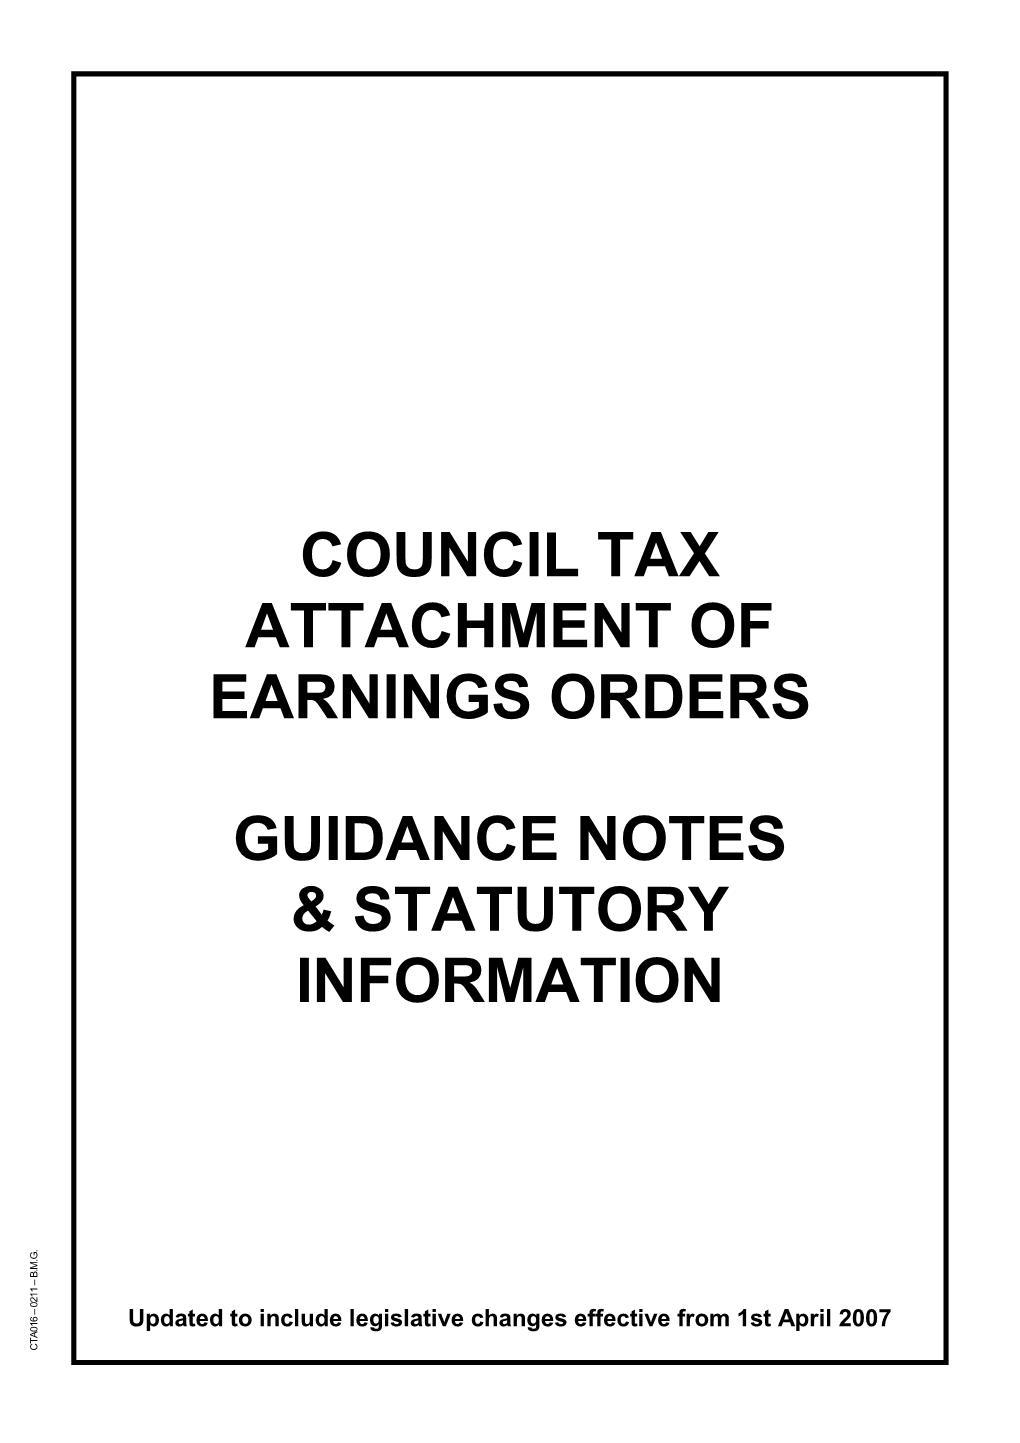 Council Tax Attachment of Earnings Orders Guidance